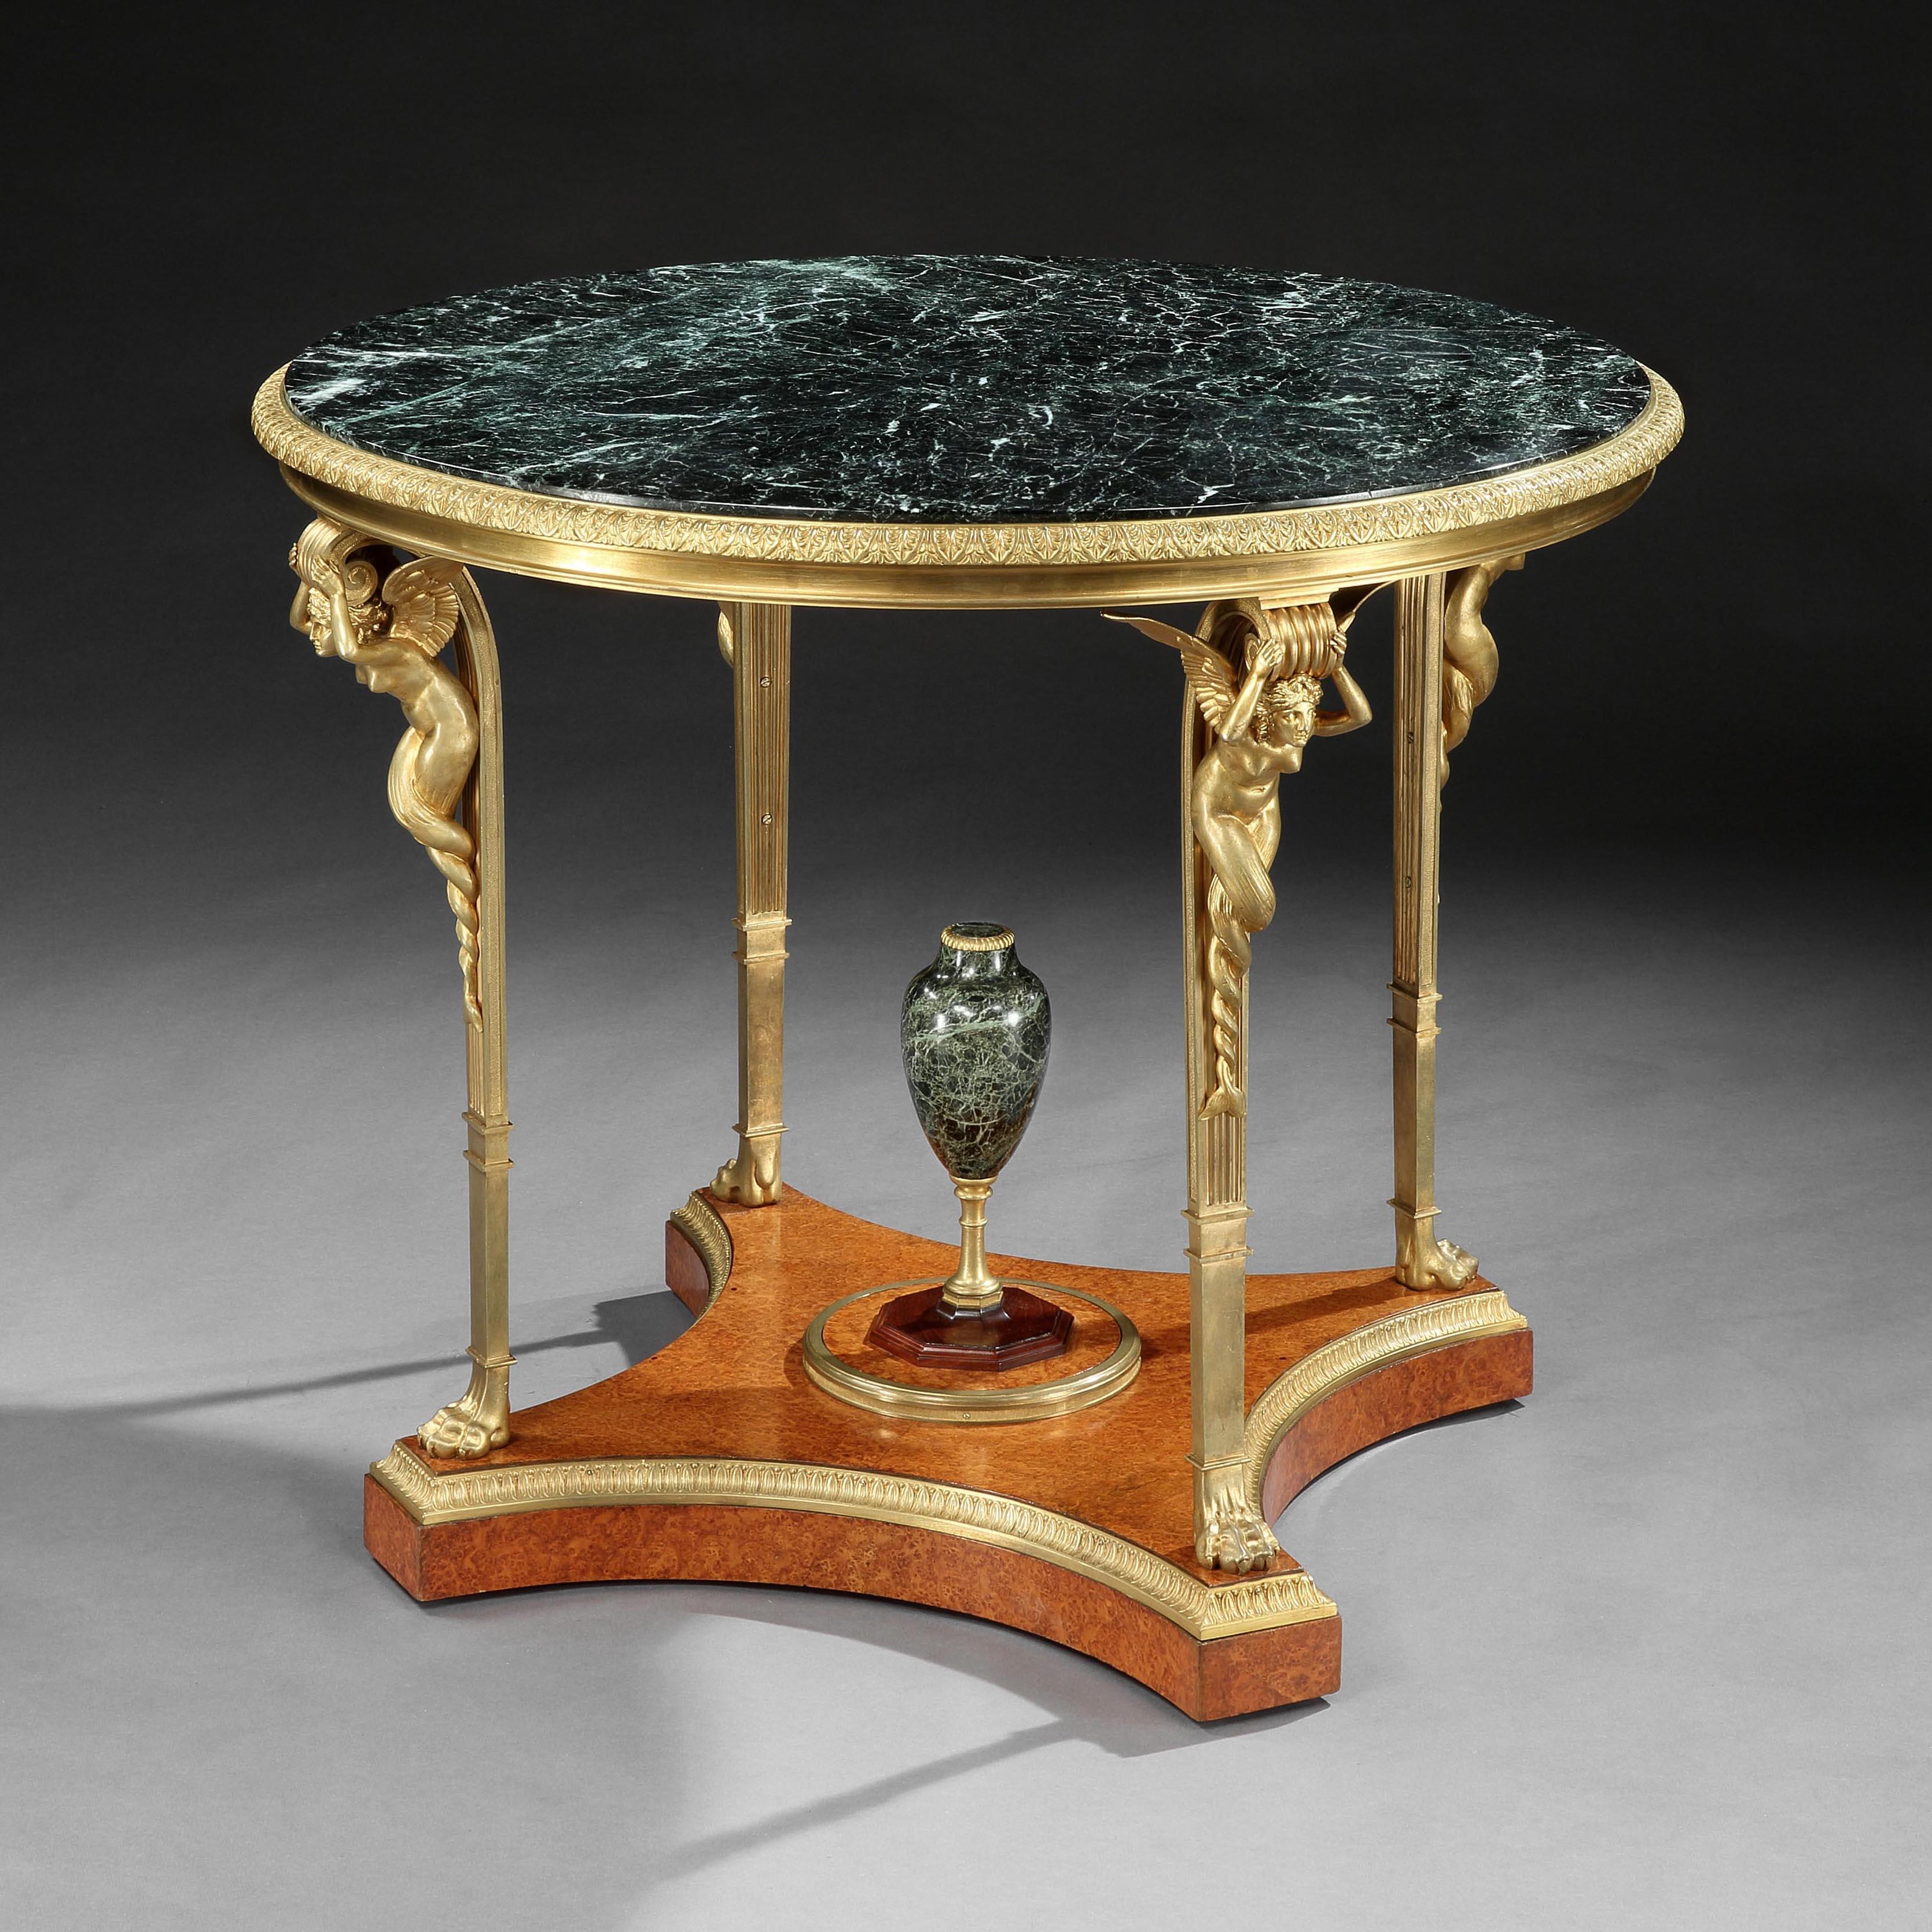 An Exceptional Gueridon table
Attributed to Maison Millet of Paris

After the original delivered to Fontainebleau
Attributed to Adam Weisweiler (1746-1820)

Constructed from precious amboyna wood and finished with extensive ormolu architectural